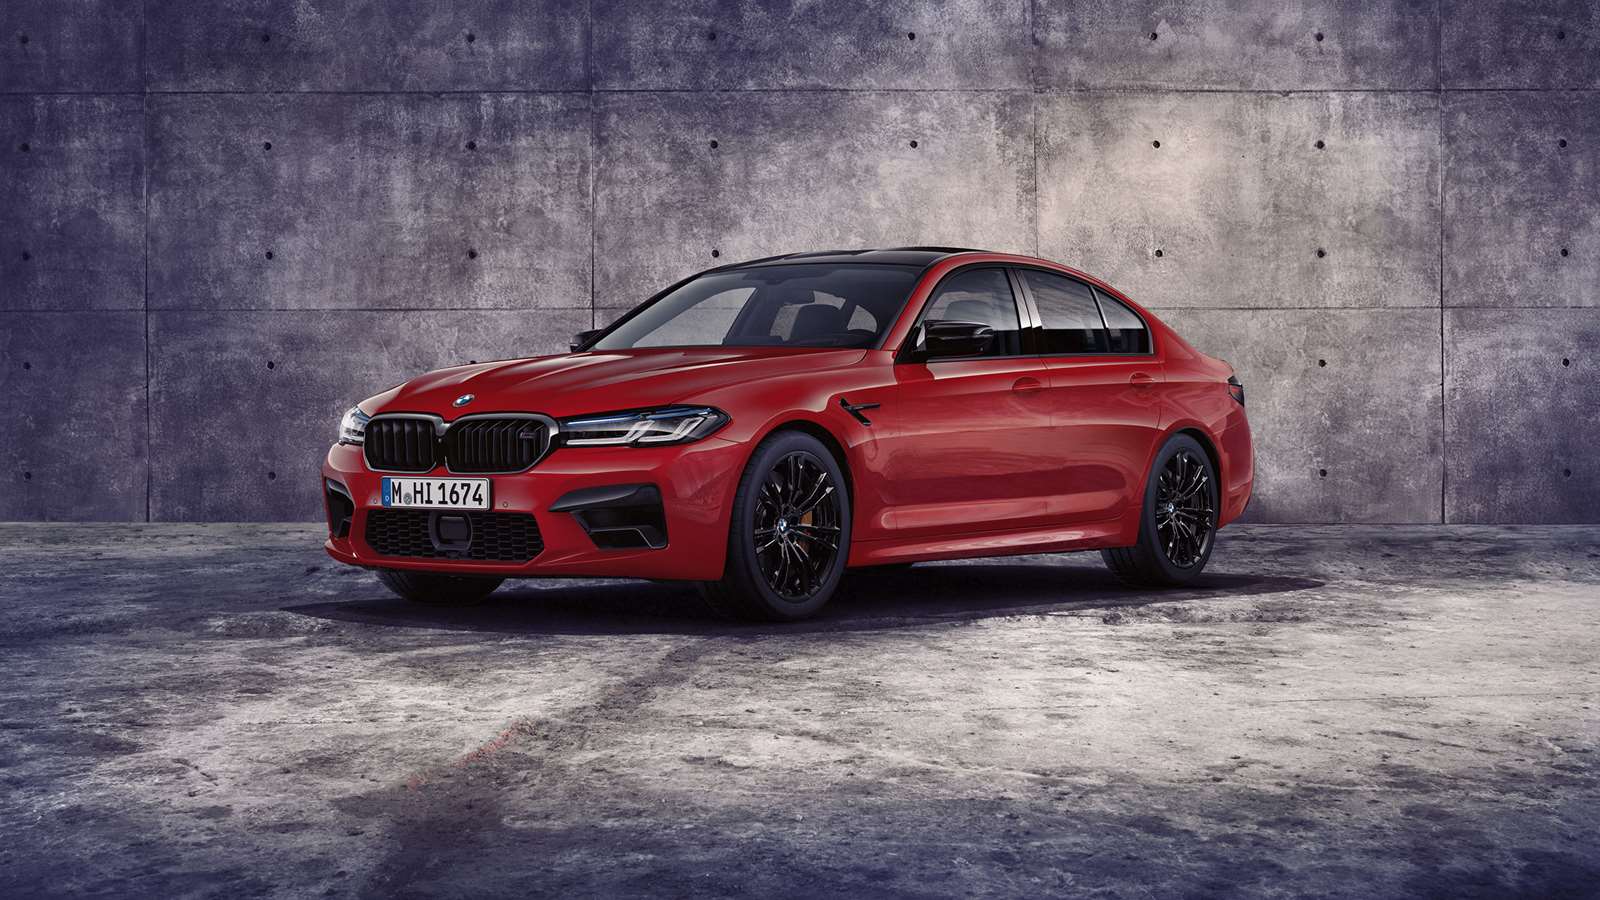 https://www.goodwood.com/globalassets/.road--racing/road/news/2020/6-june/bmw-m5-competition-2020/bmw-m5-competition-2020-goodwood-17062020.jpg?crop=(62,0,2538,1393)&width=1600